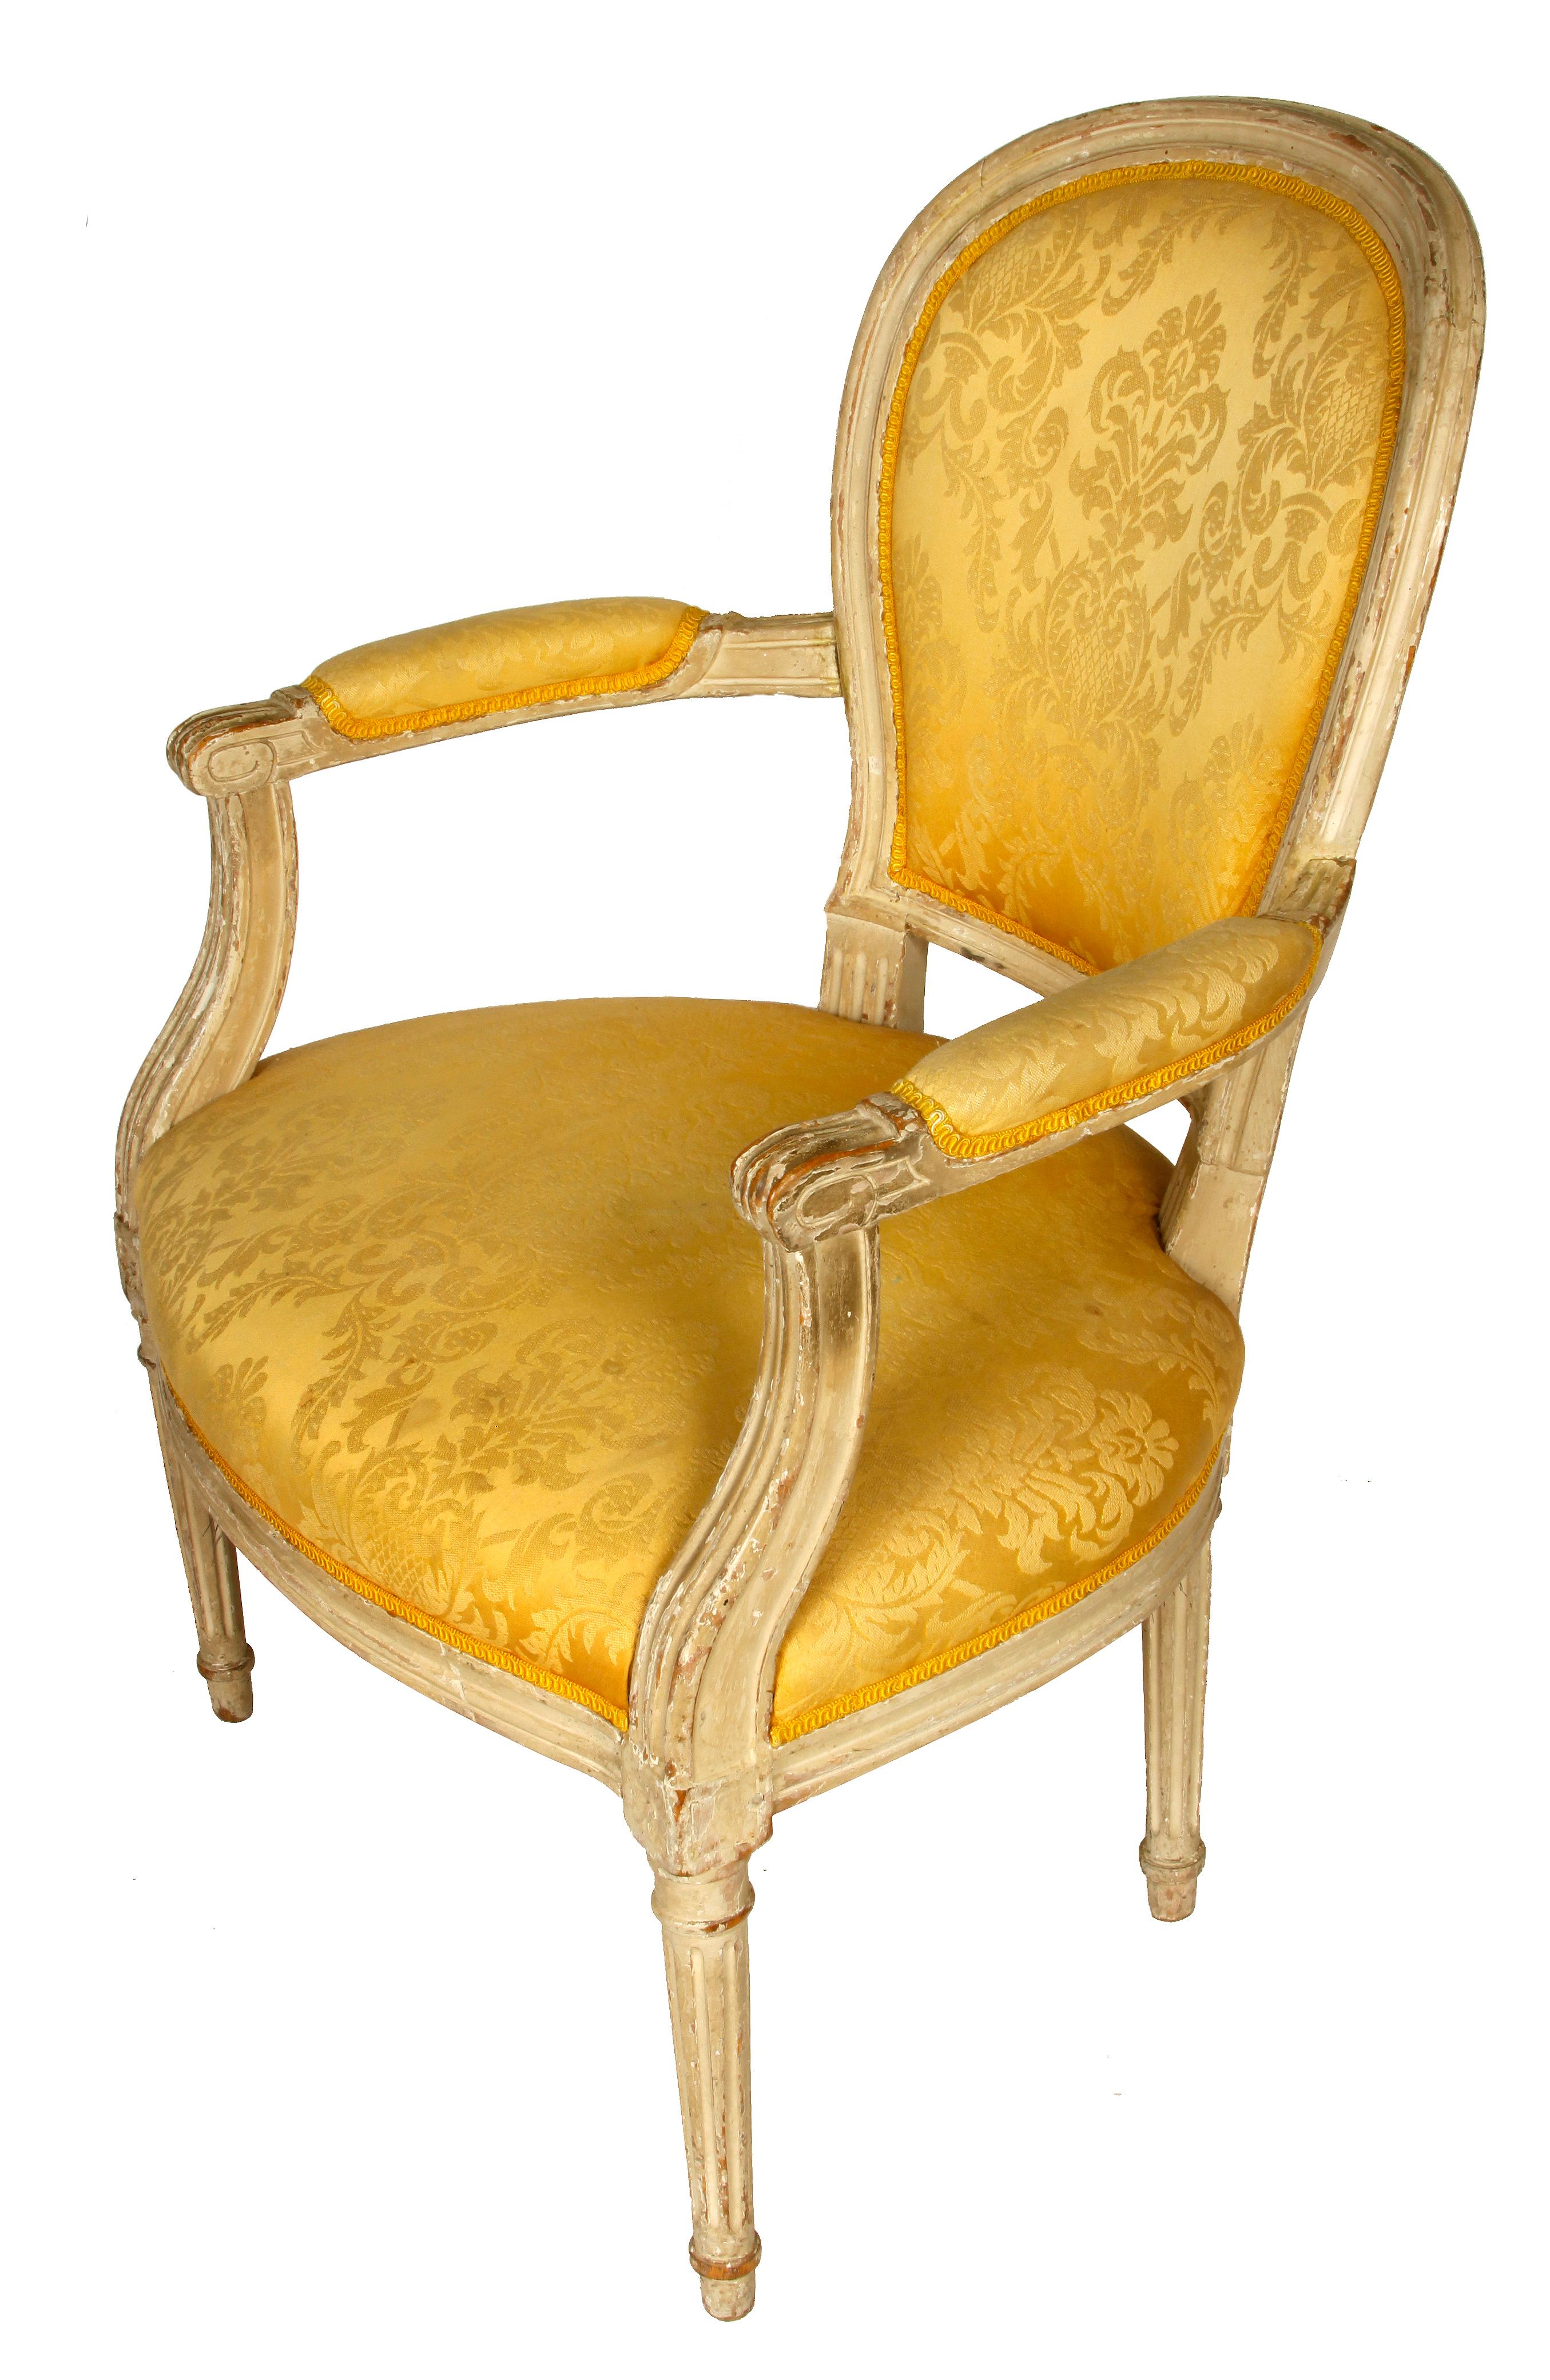 Painted Louis XVI Style Upholstered Armchair in Yellow Damask